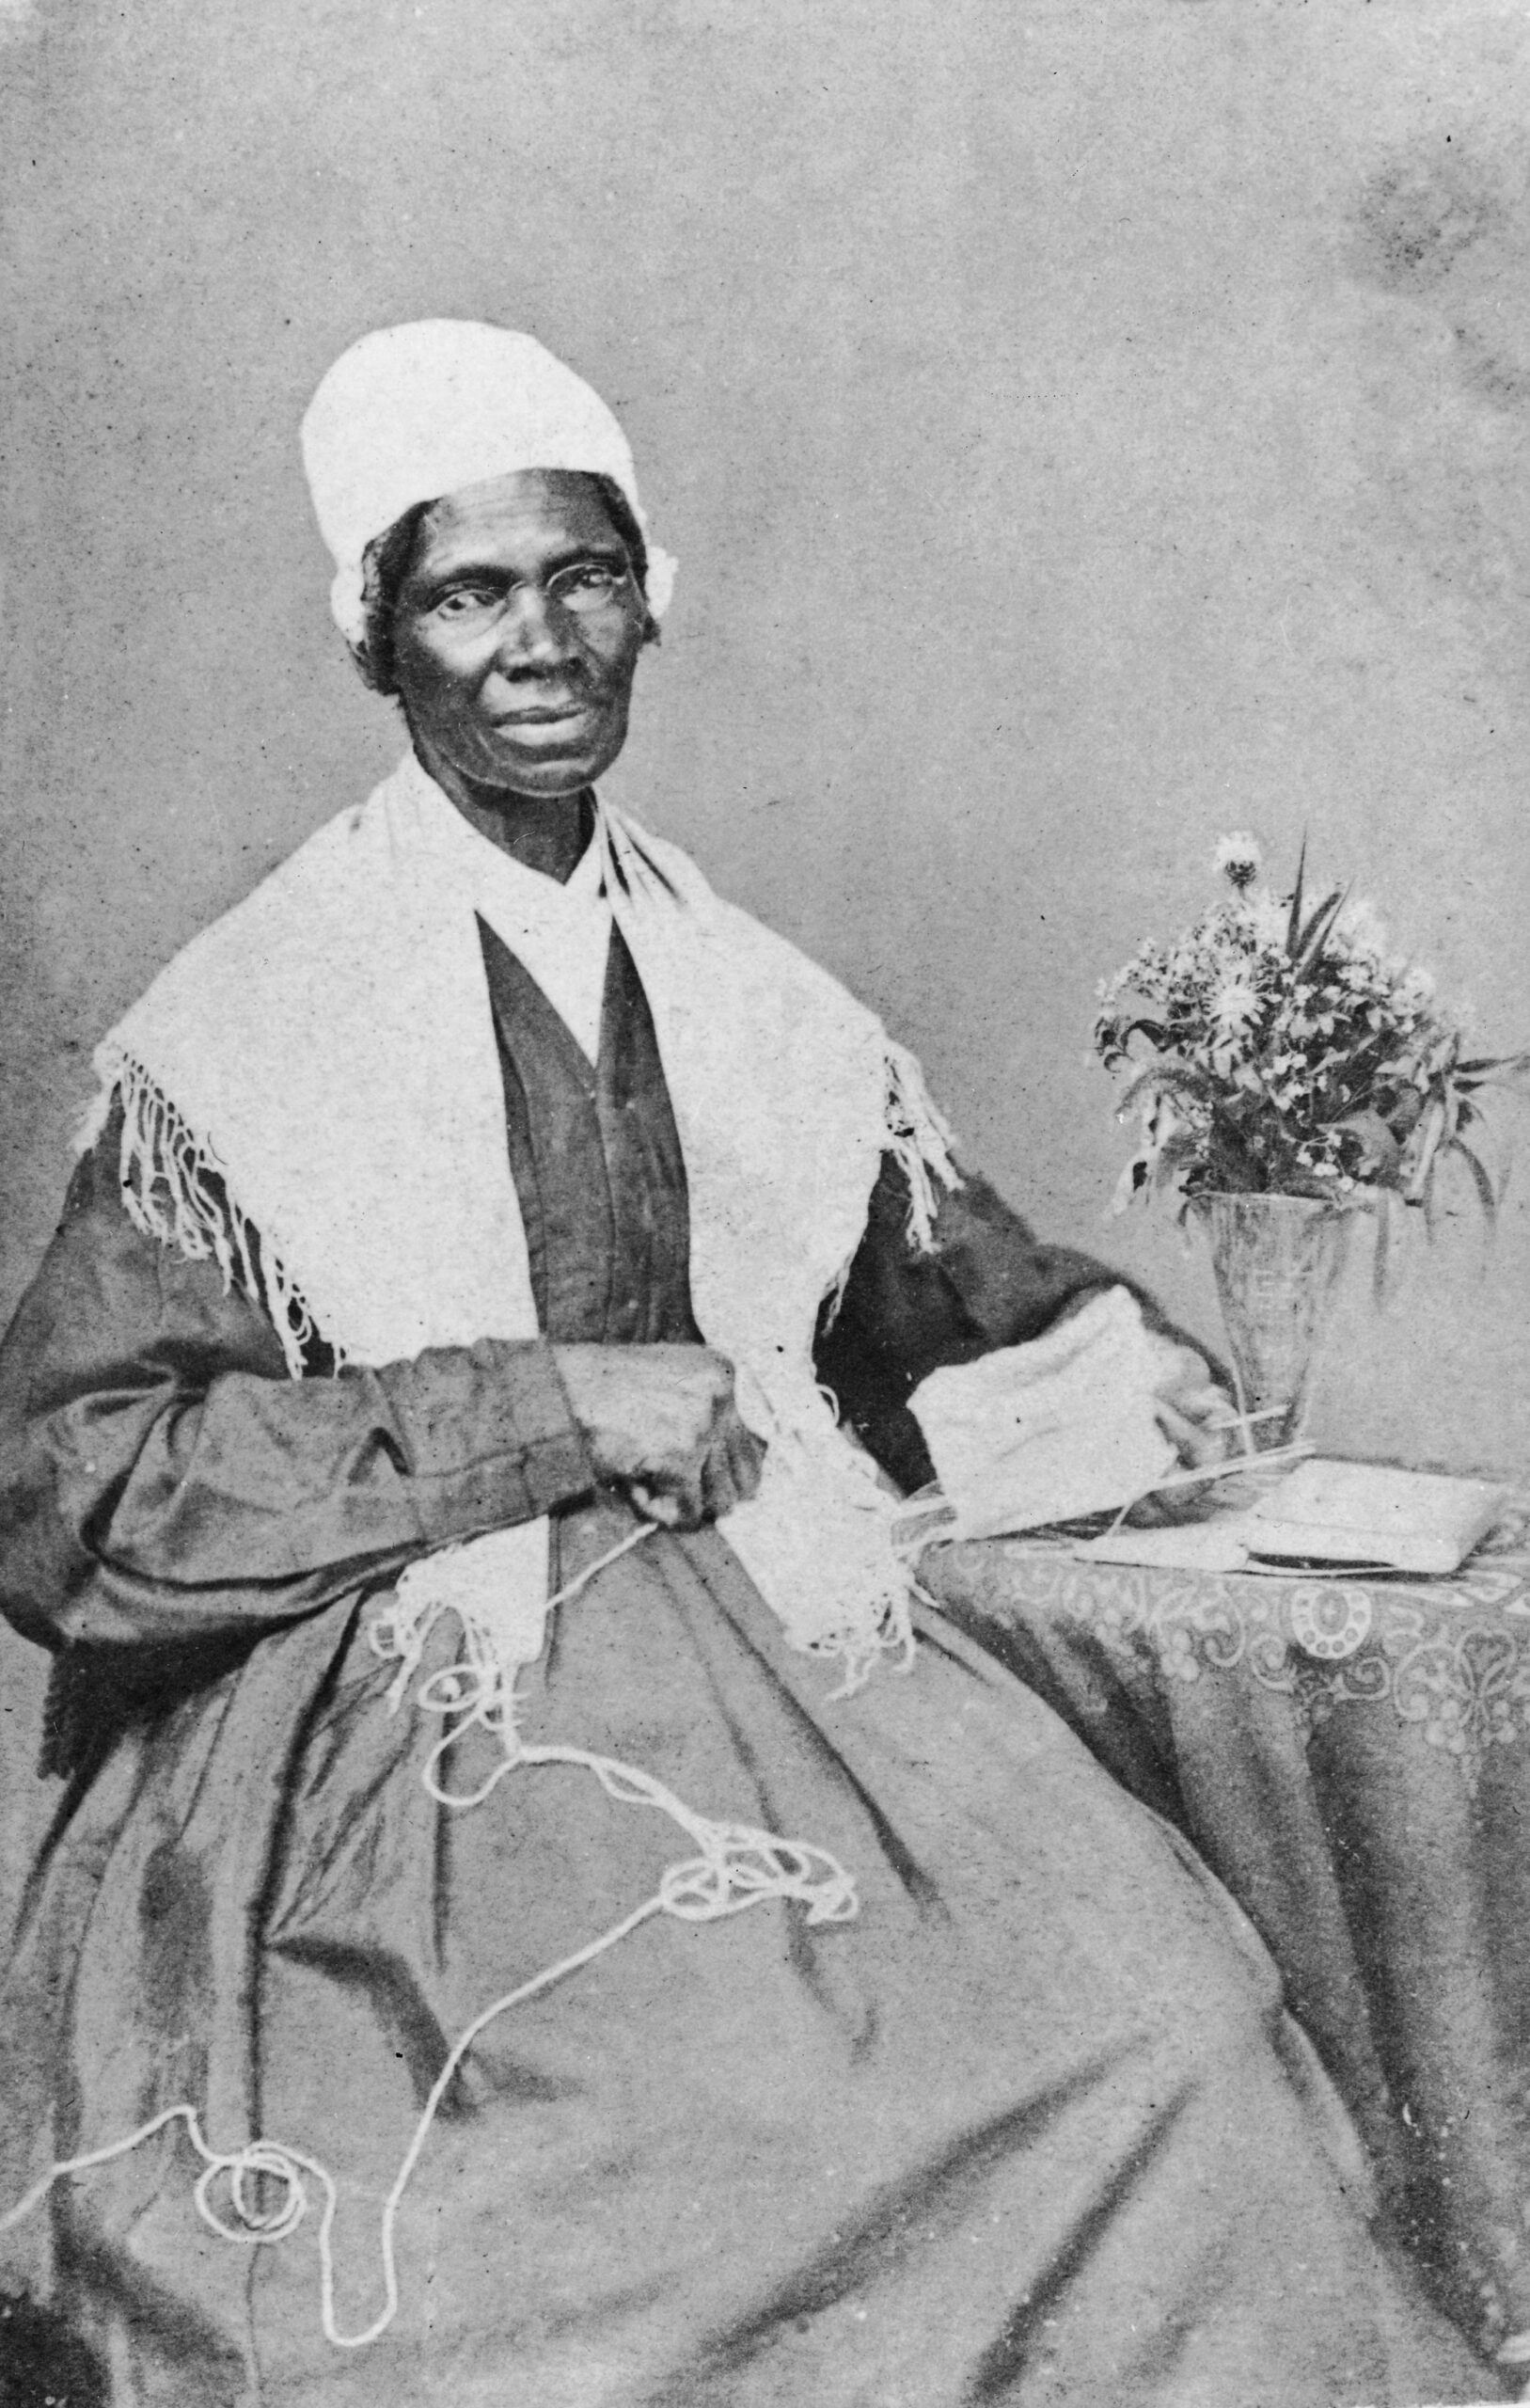 Portrait of American abolitionist and feminist Sojourner Truth (1797 - 1883), a former slave who advocated emancipation, c. 1880.